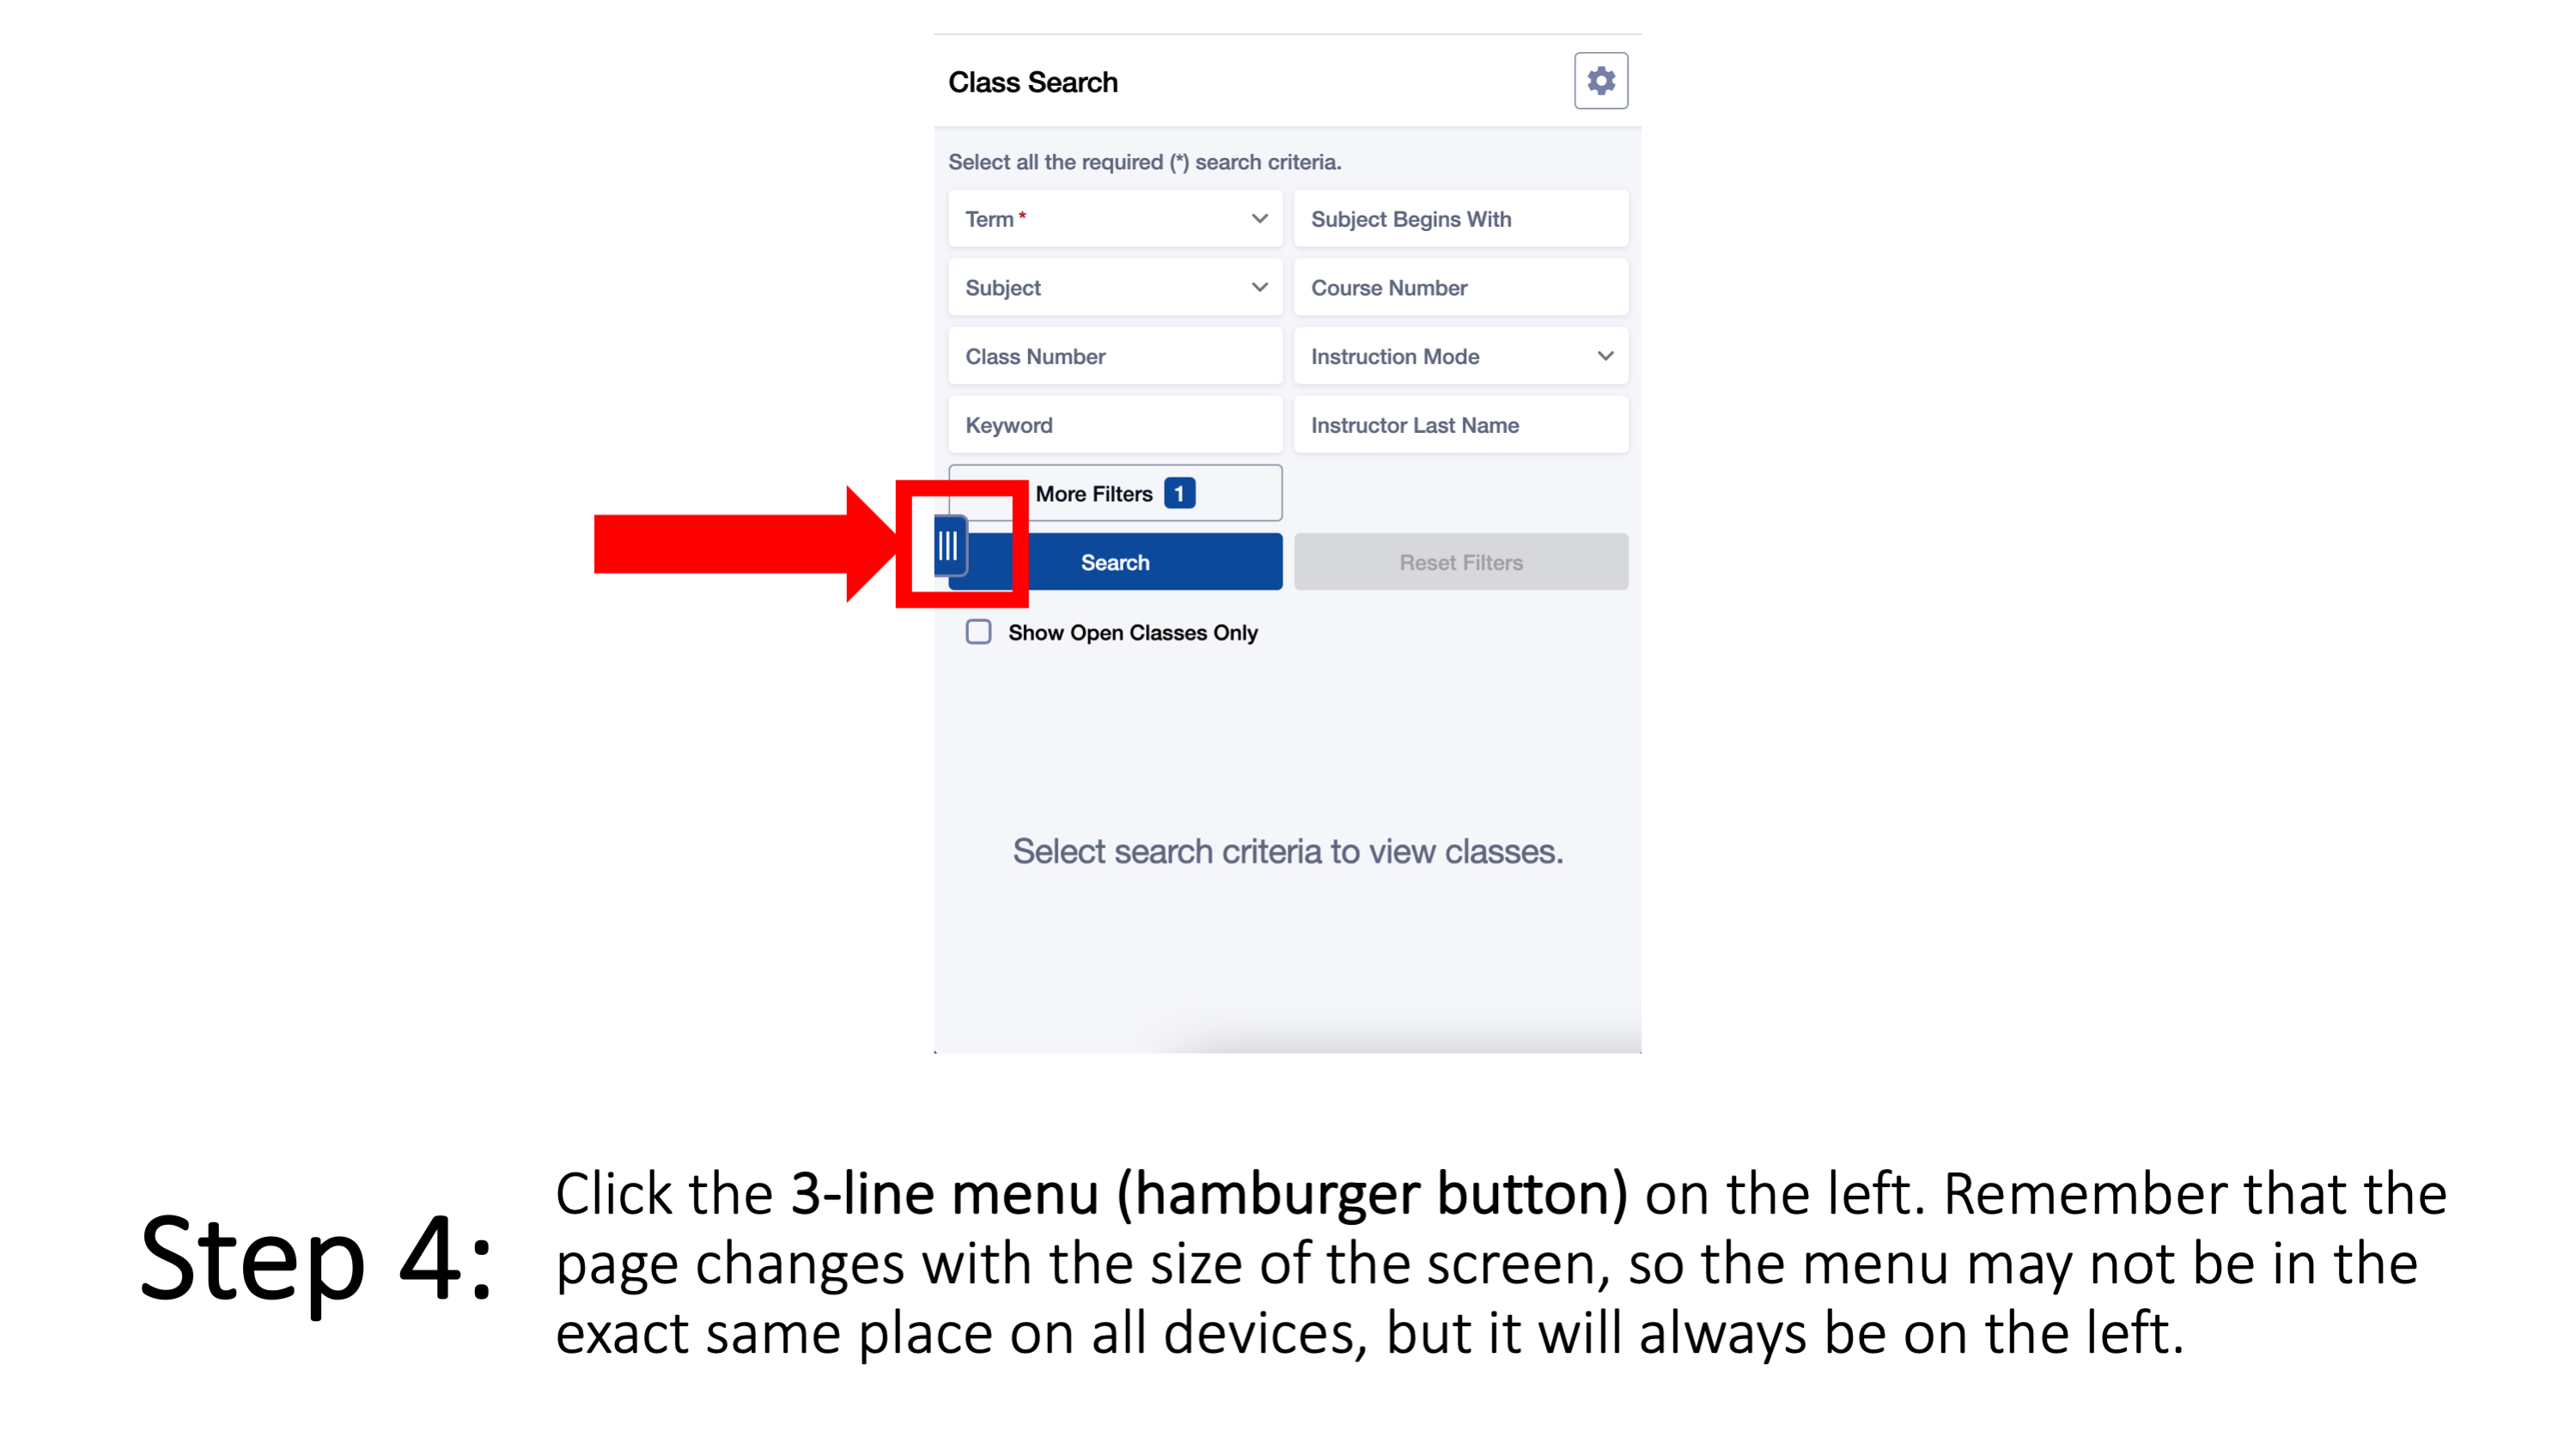 Step 4: Click the 3-line menu (hamburger button) on the left. Remember that the page changes with the size of the screen, so the menu may not be in the exact same place on all devices, but it will always be on the left.